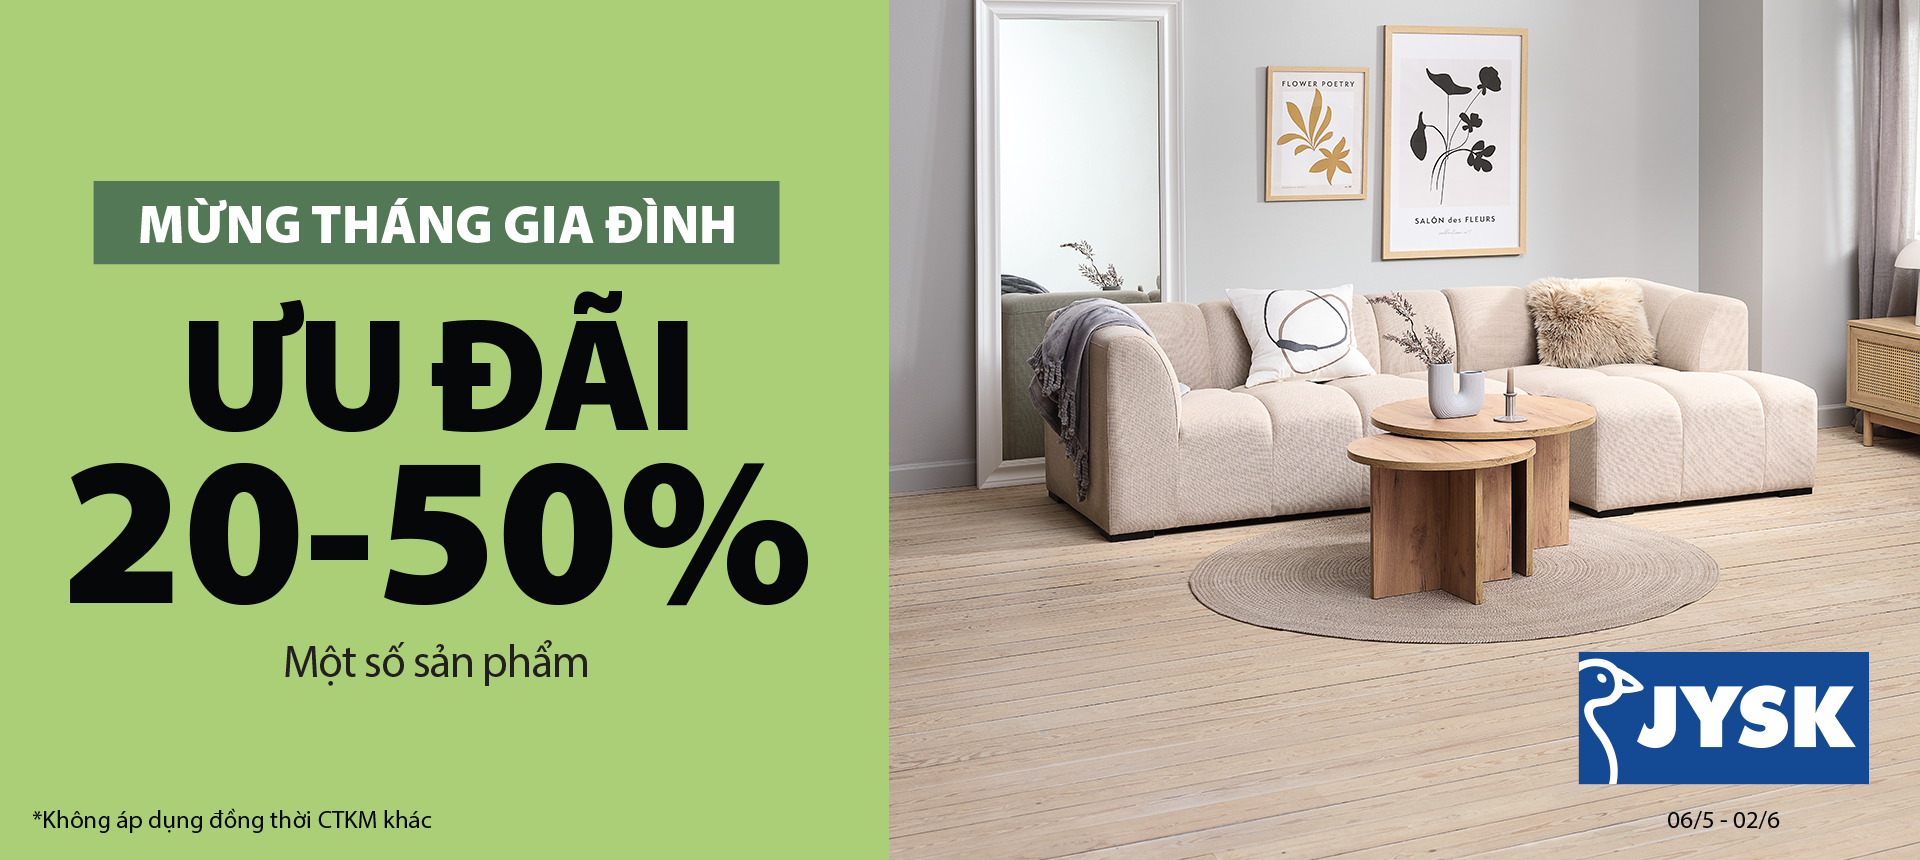 HAPPY FAMILY’S MONTH - JYSK DISCOUNT 20% - 50%